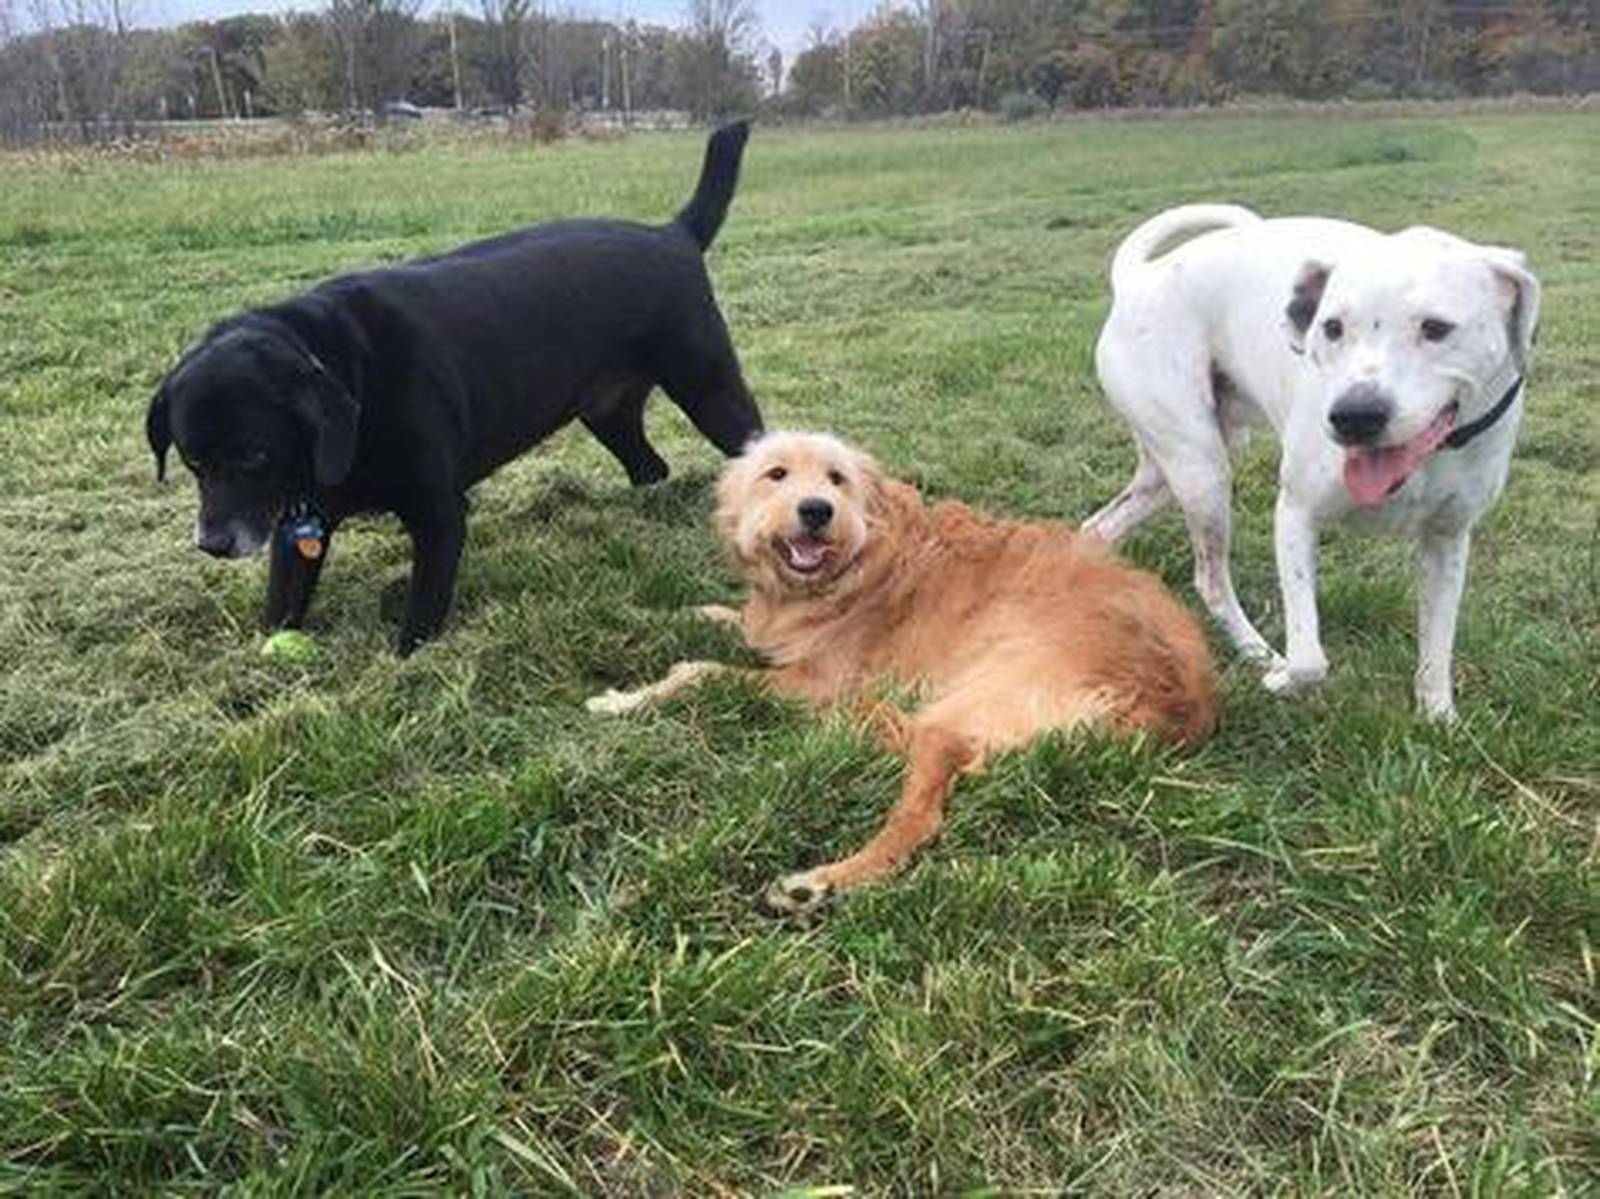 Discounted 2021 dog park passes for dog park permit holders – Shaw Local